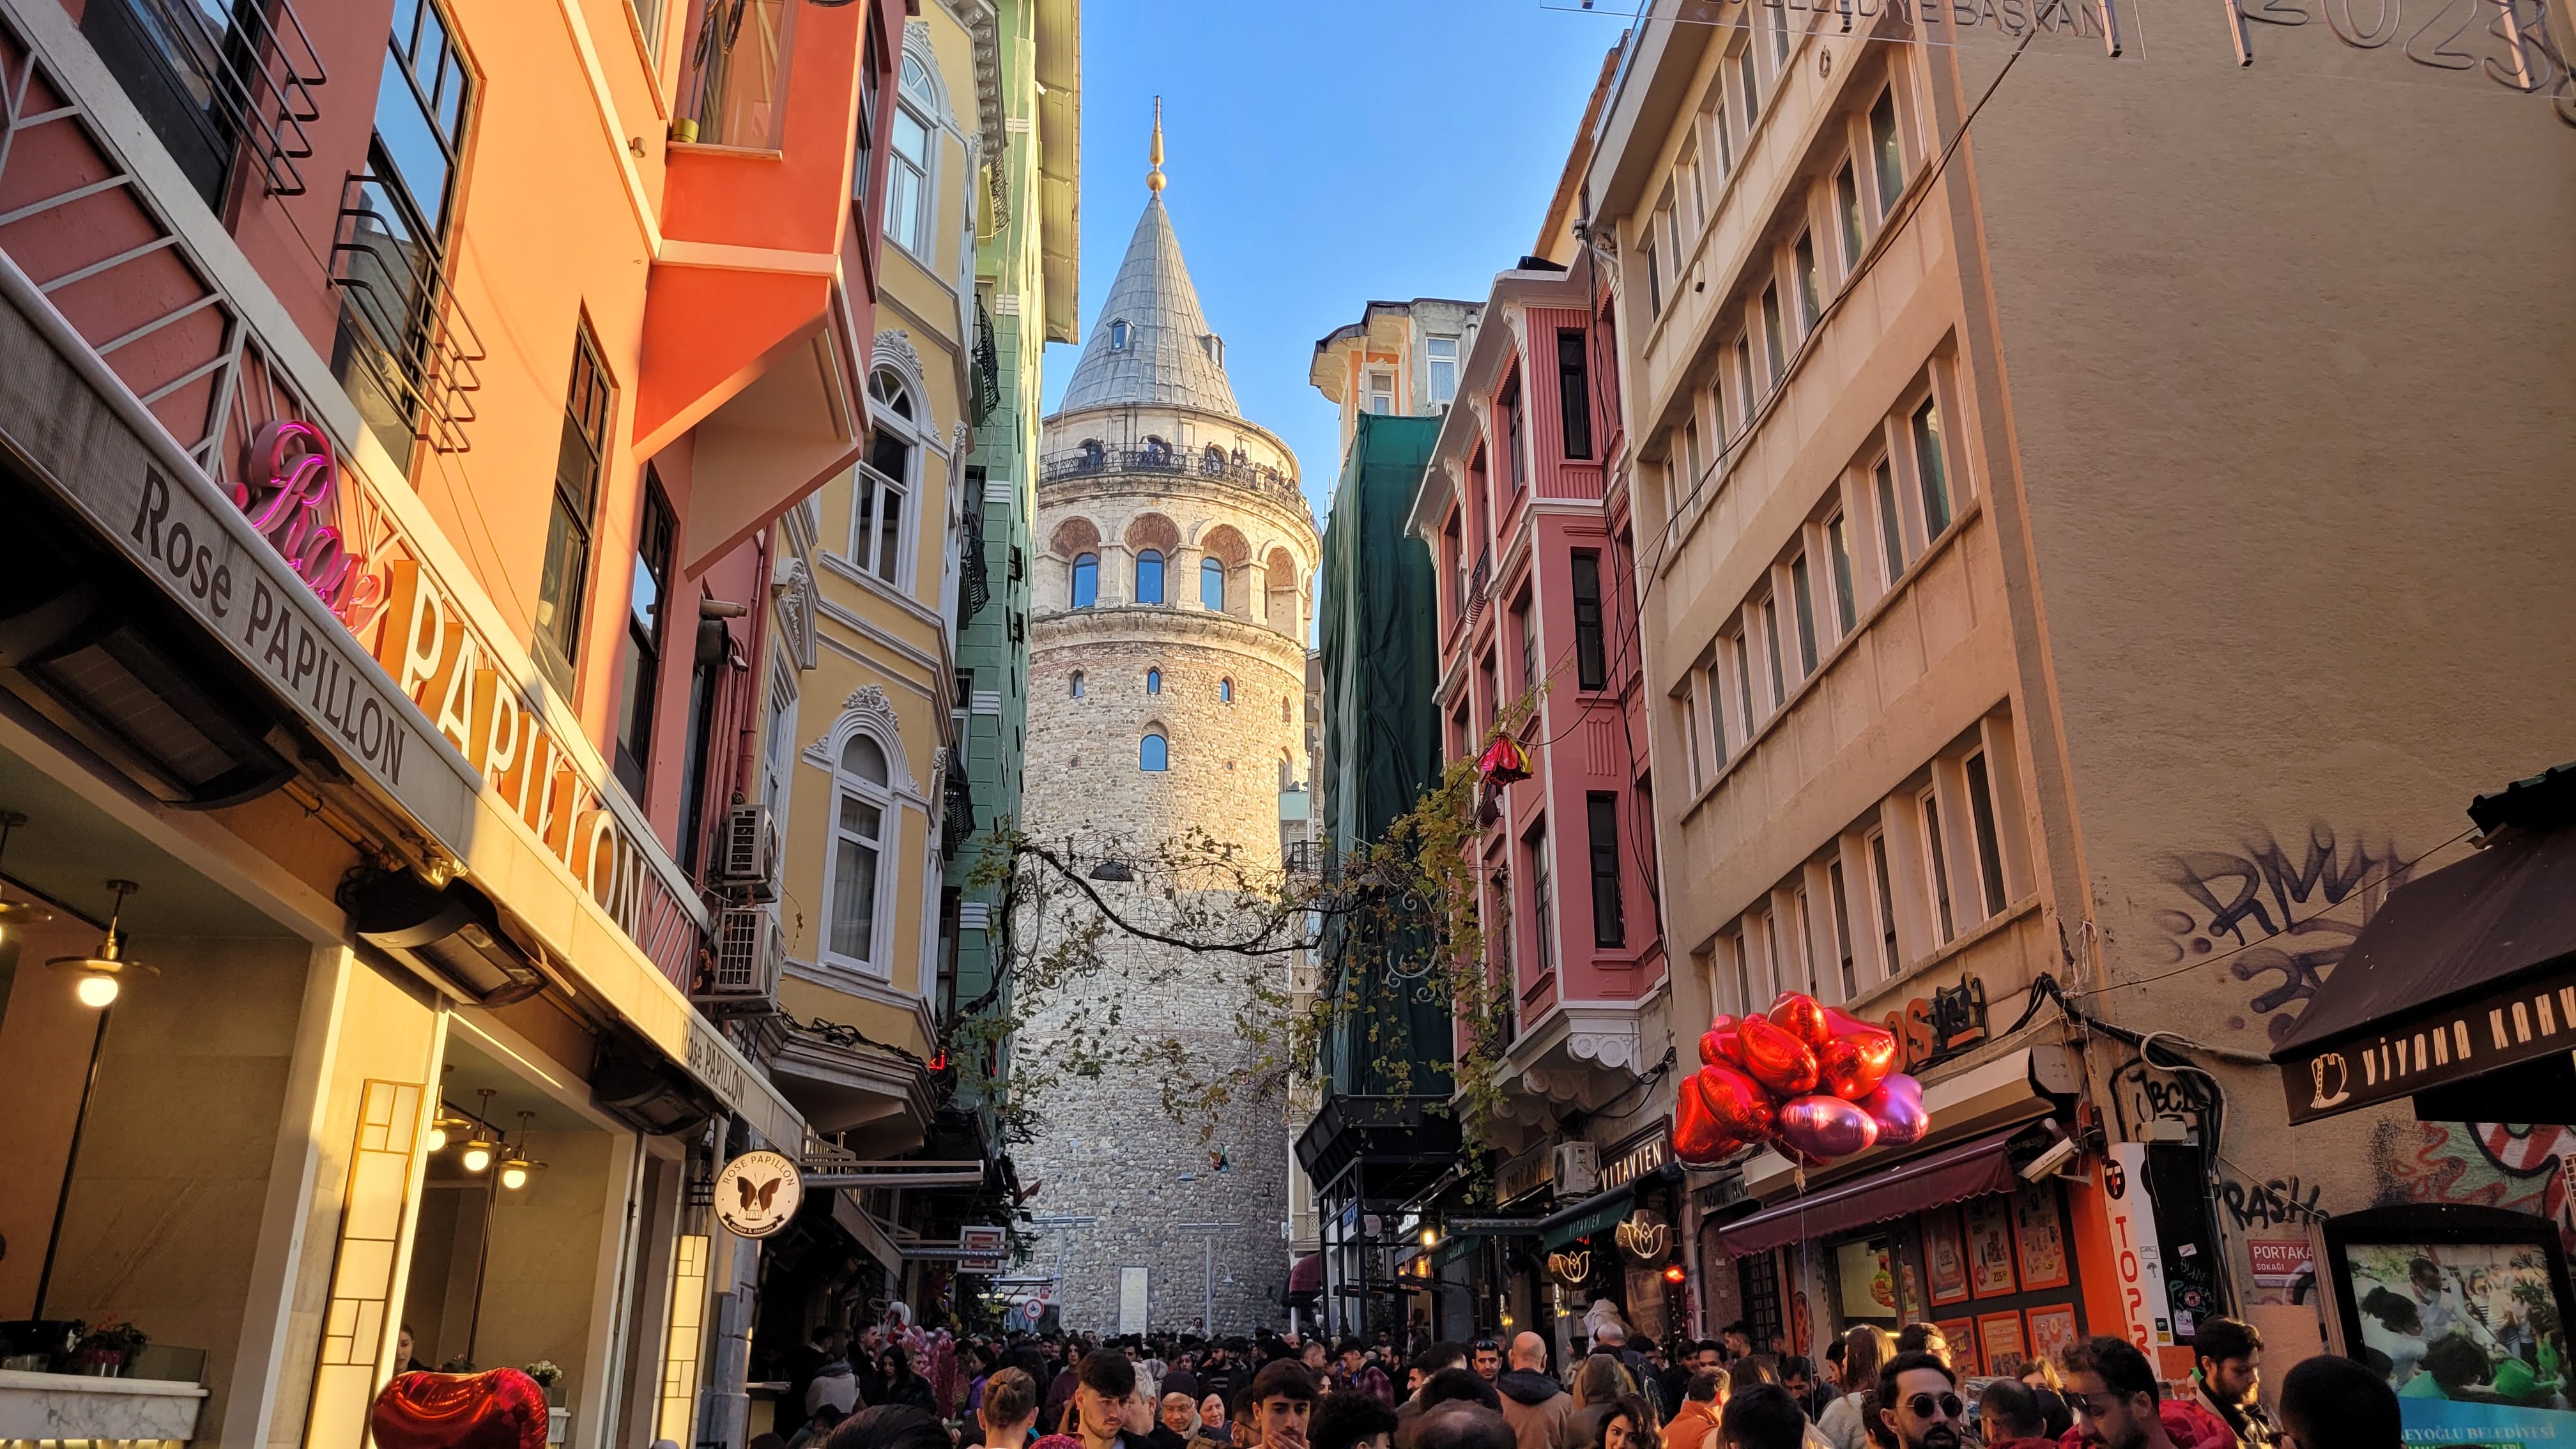 Galata Tower in new year's eve.